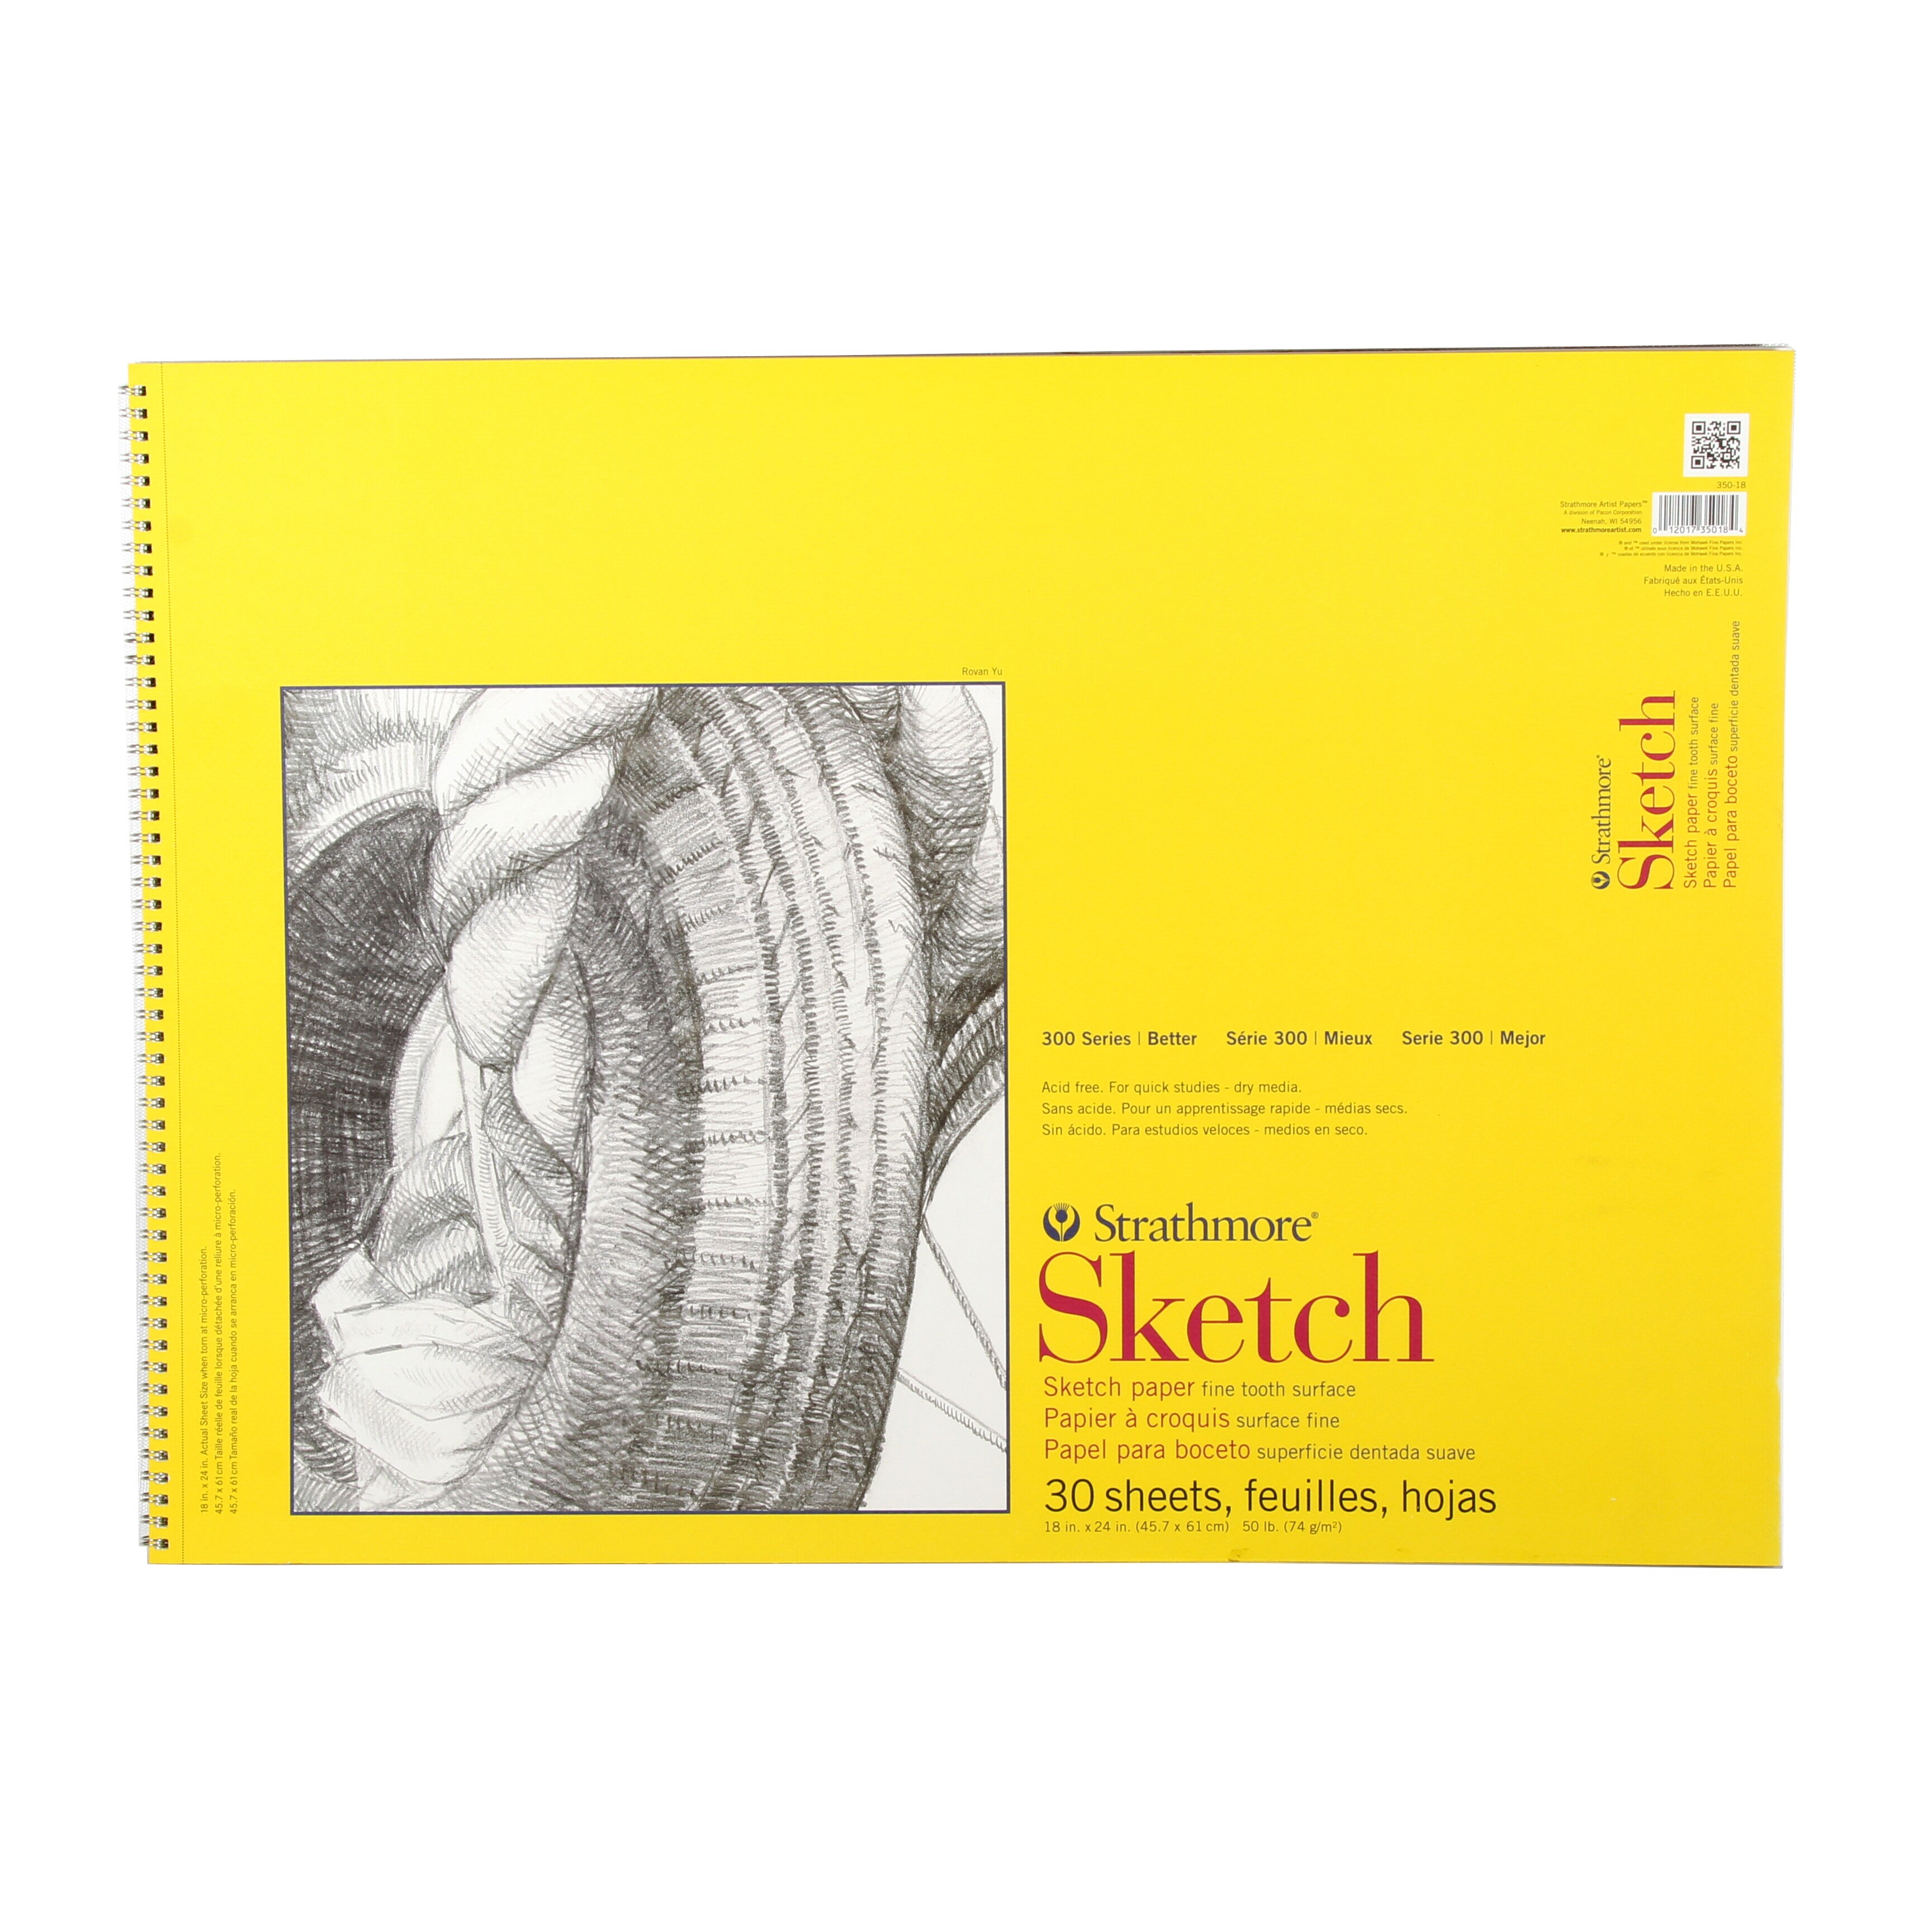 Strathmore Sketch Paper Pad, 300 Series, Spiral-Bound, 18" x 24", 30 Sheets